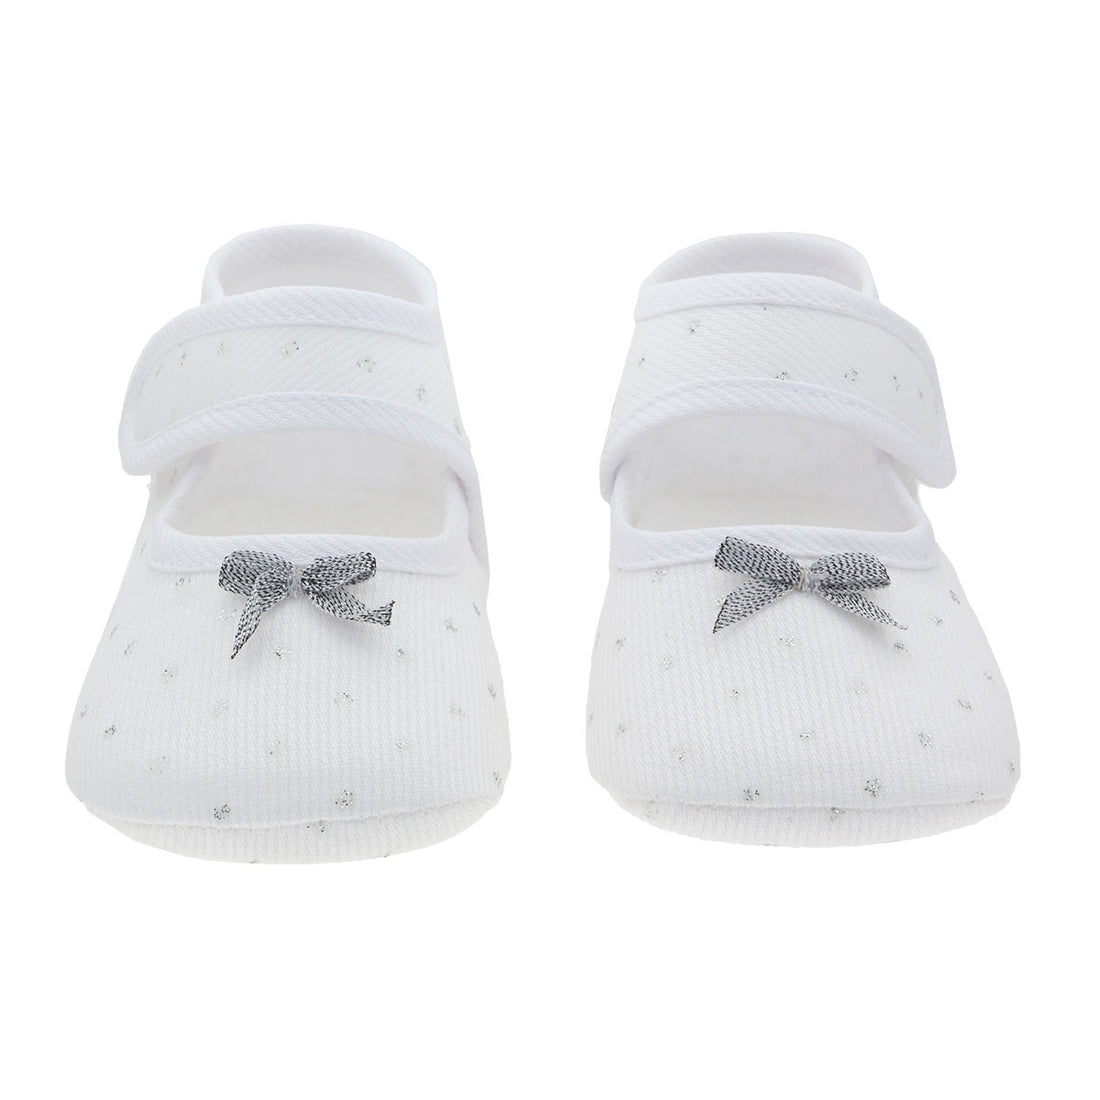 r&j-cambrass-sa-summer-baby-shoes-290-unic- (2)